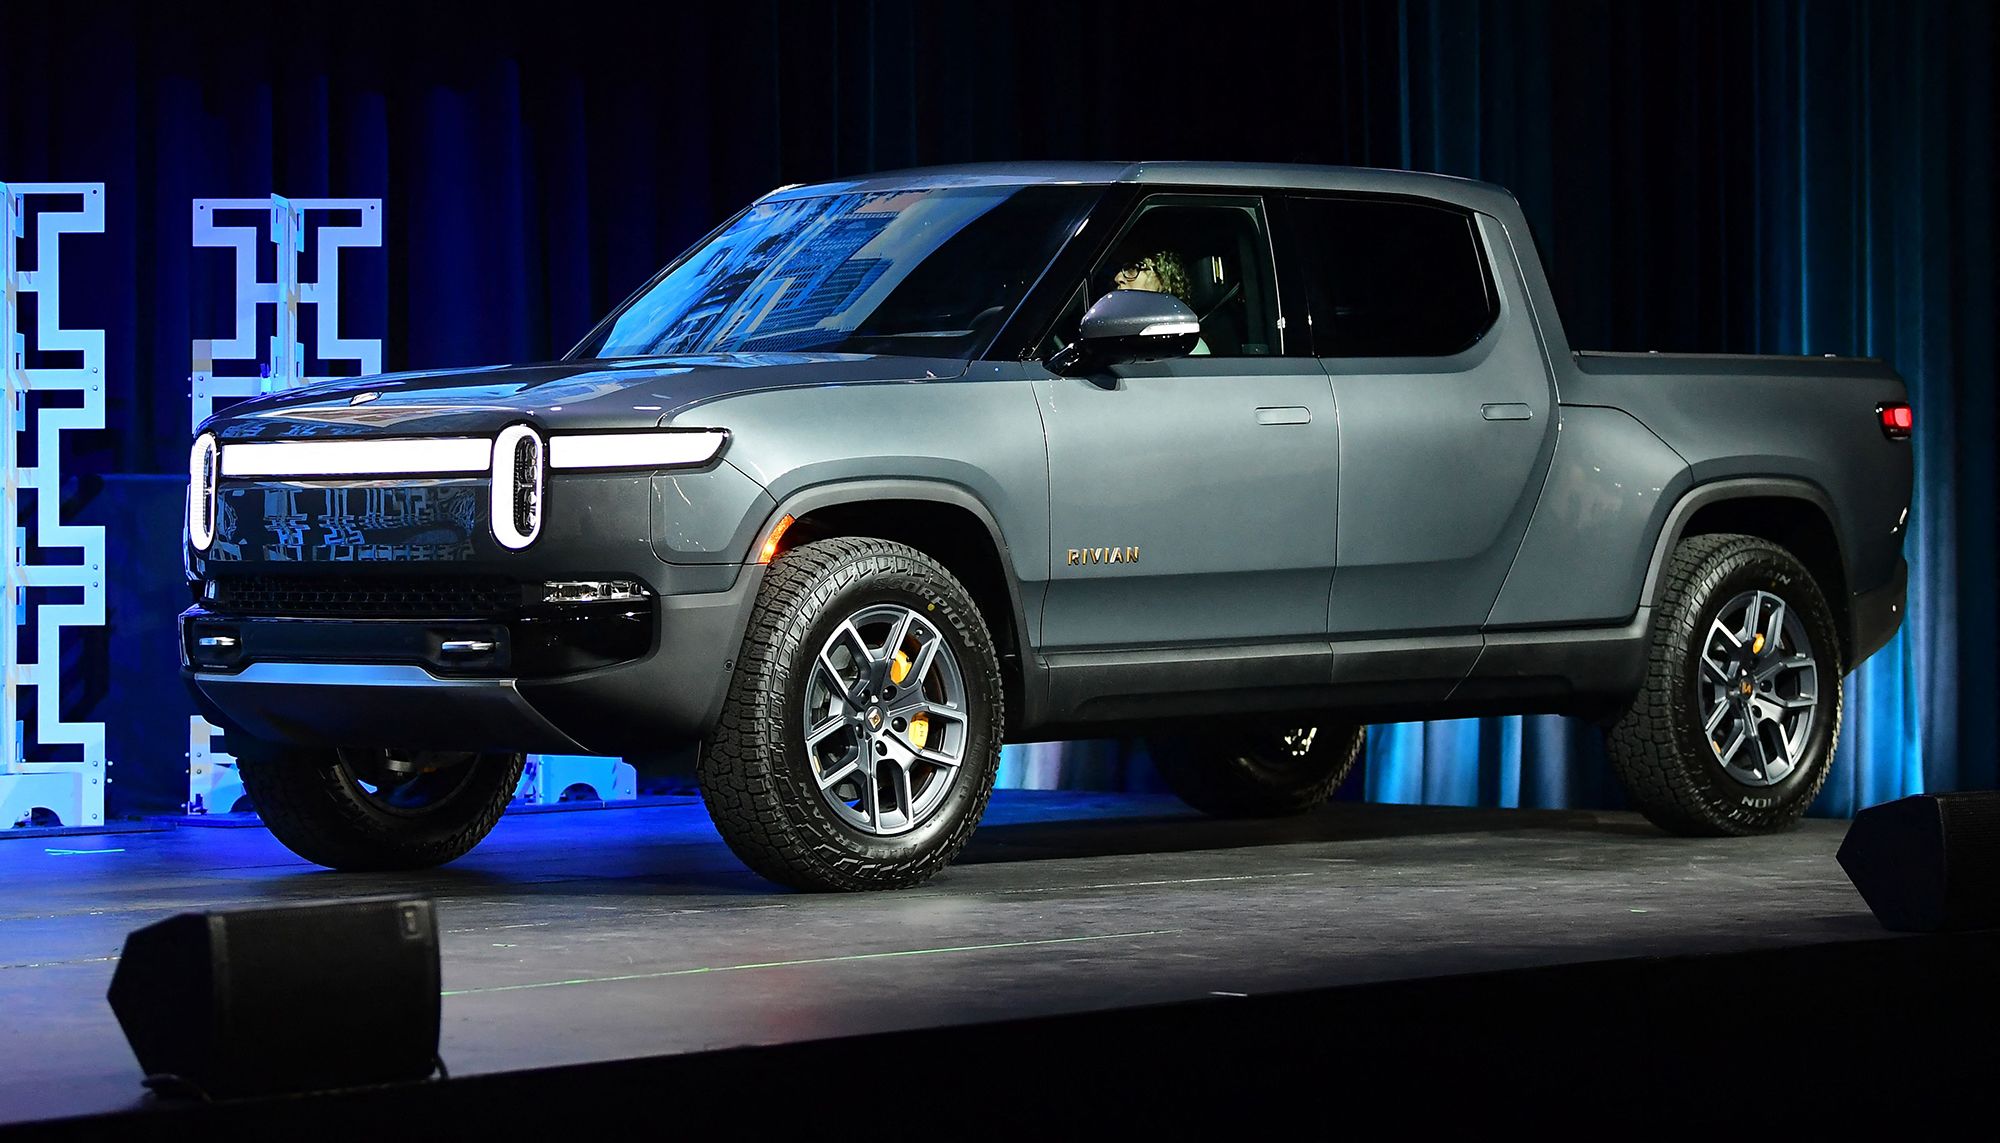 Rivian aims for a piece of the pickup and SUV markets with EV truck